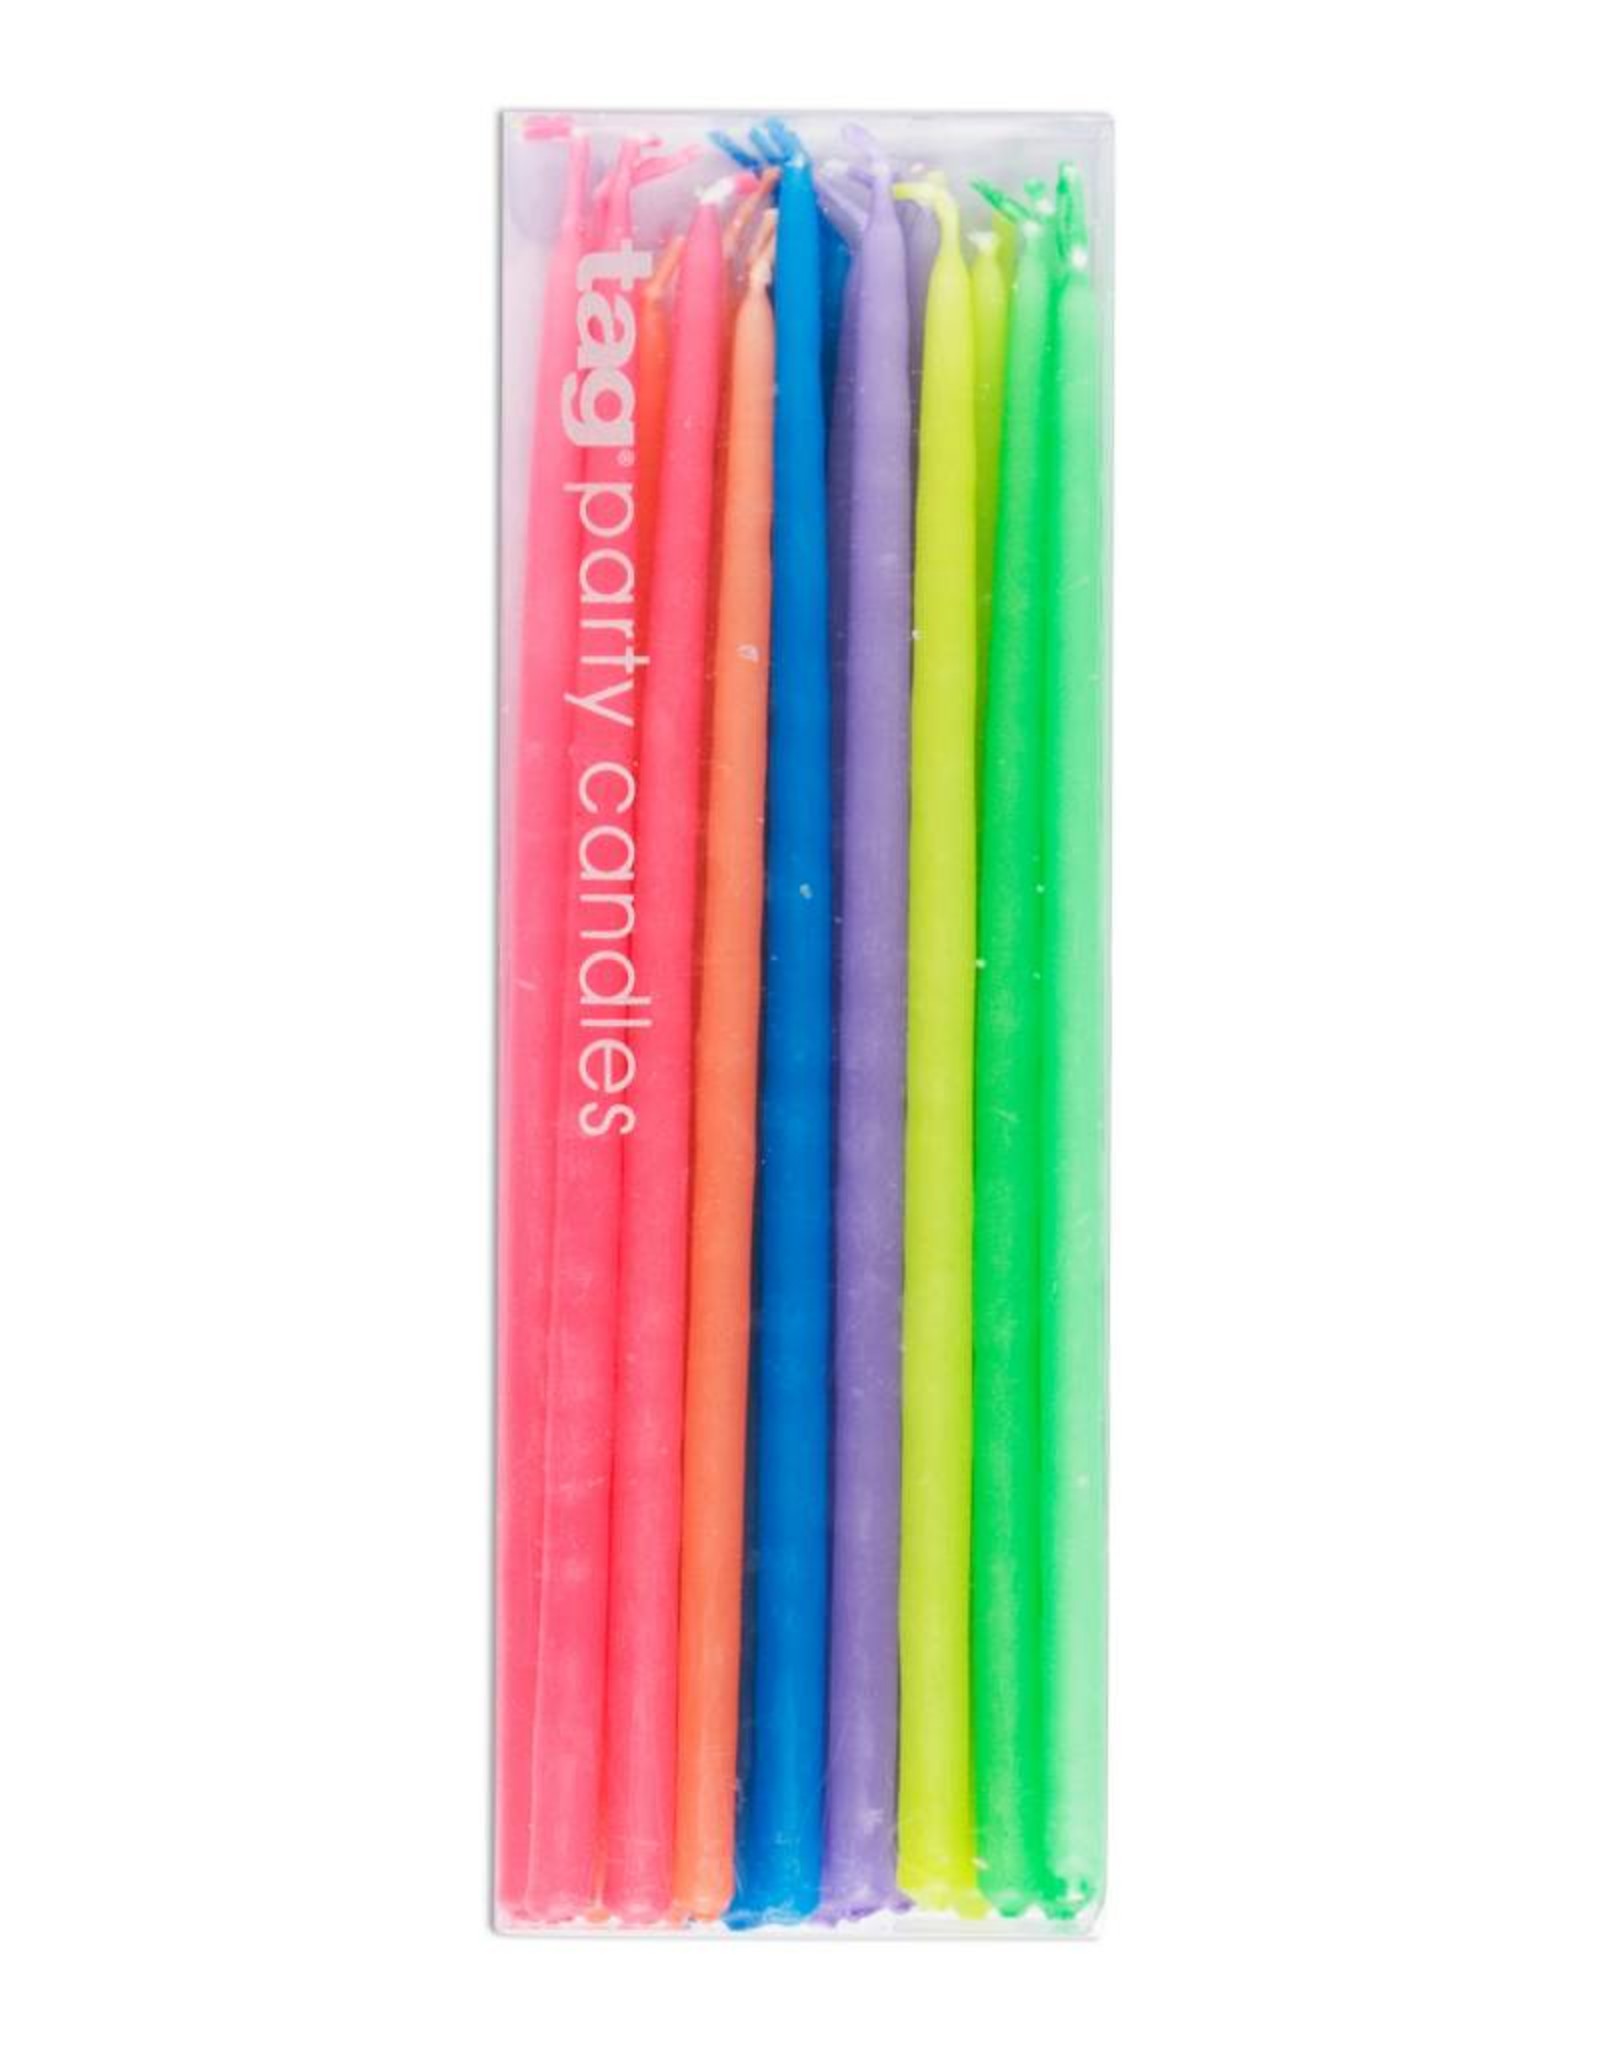 Party Candles (Multi Color) -24ct